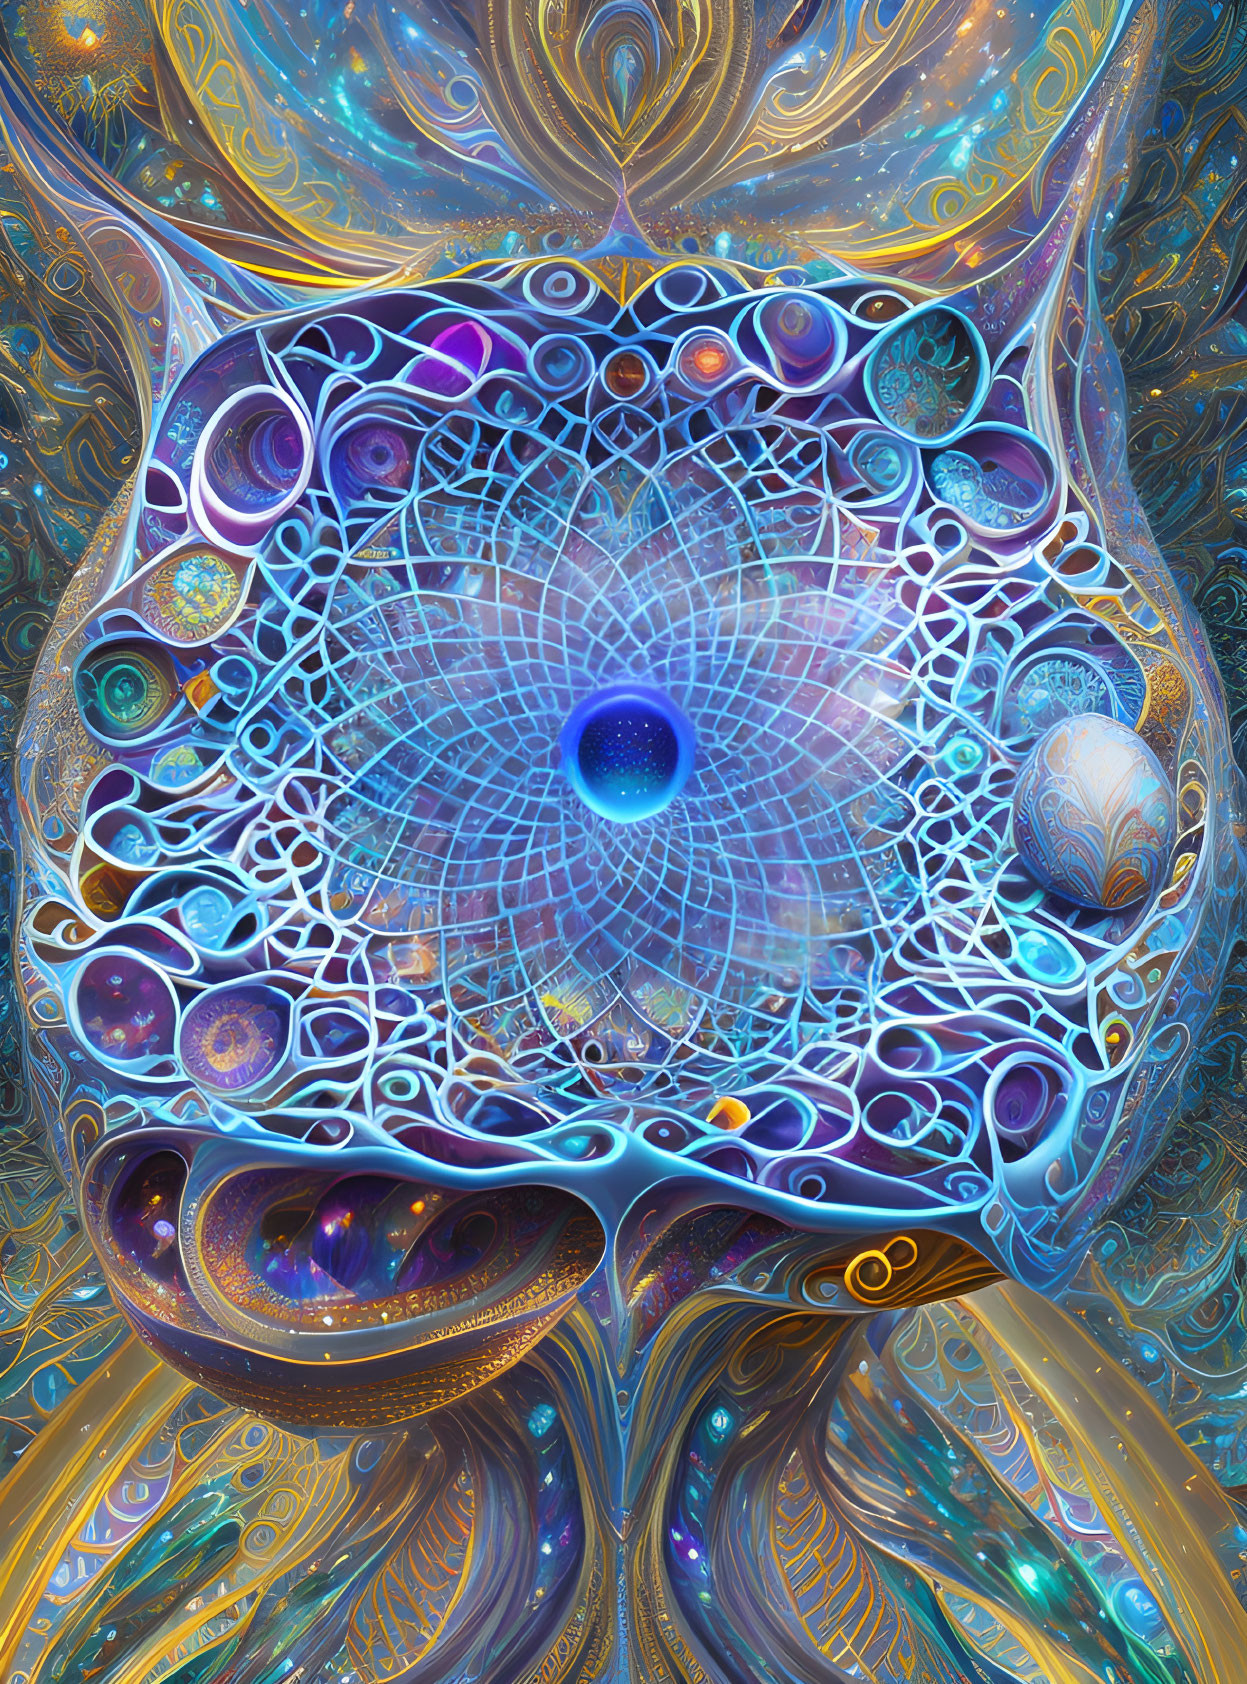 Colorful Psychedelic Digital Artwork with Cosmic Patterns and Mandala Eye